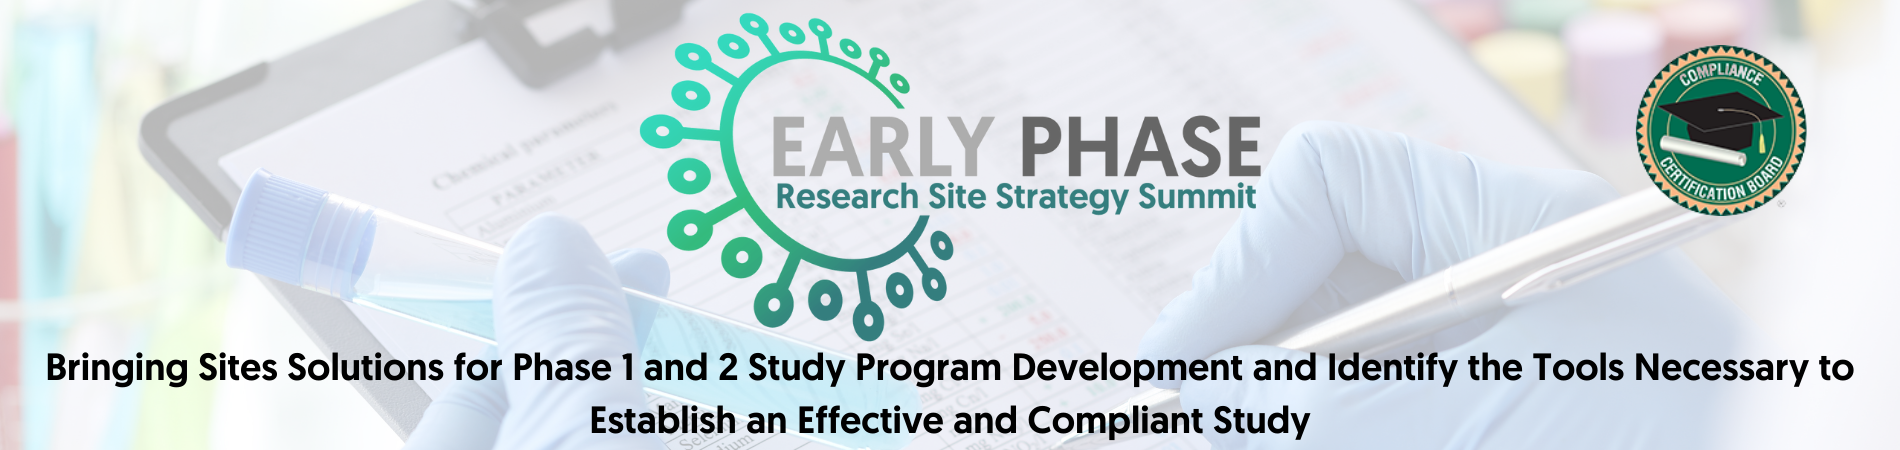 Early Phase Research Site Strategy Summit